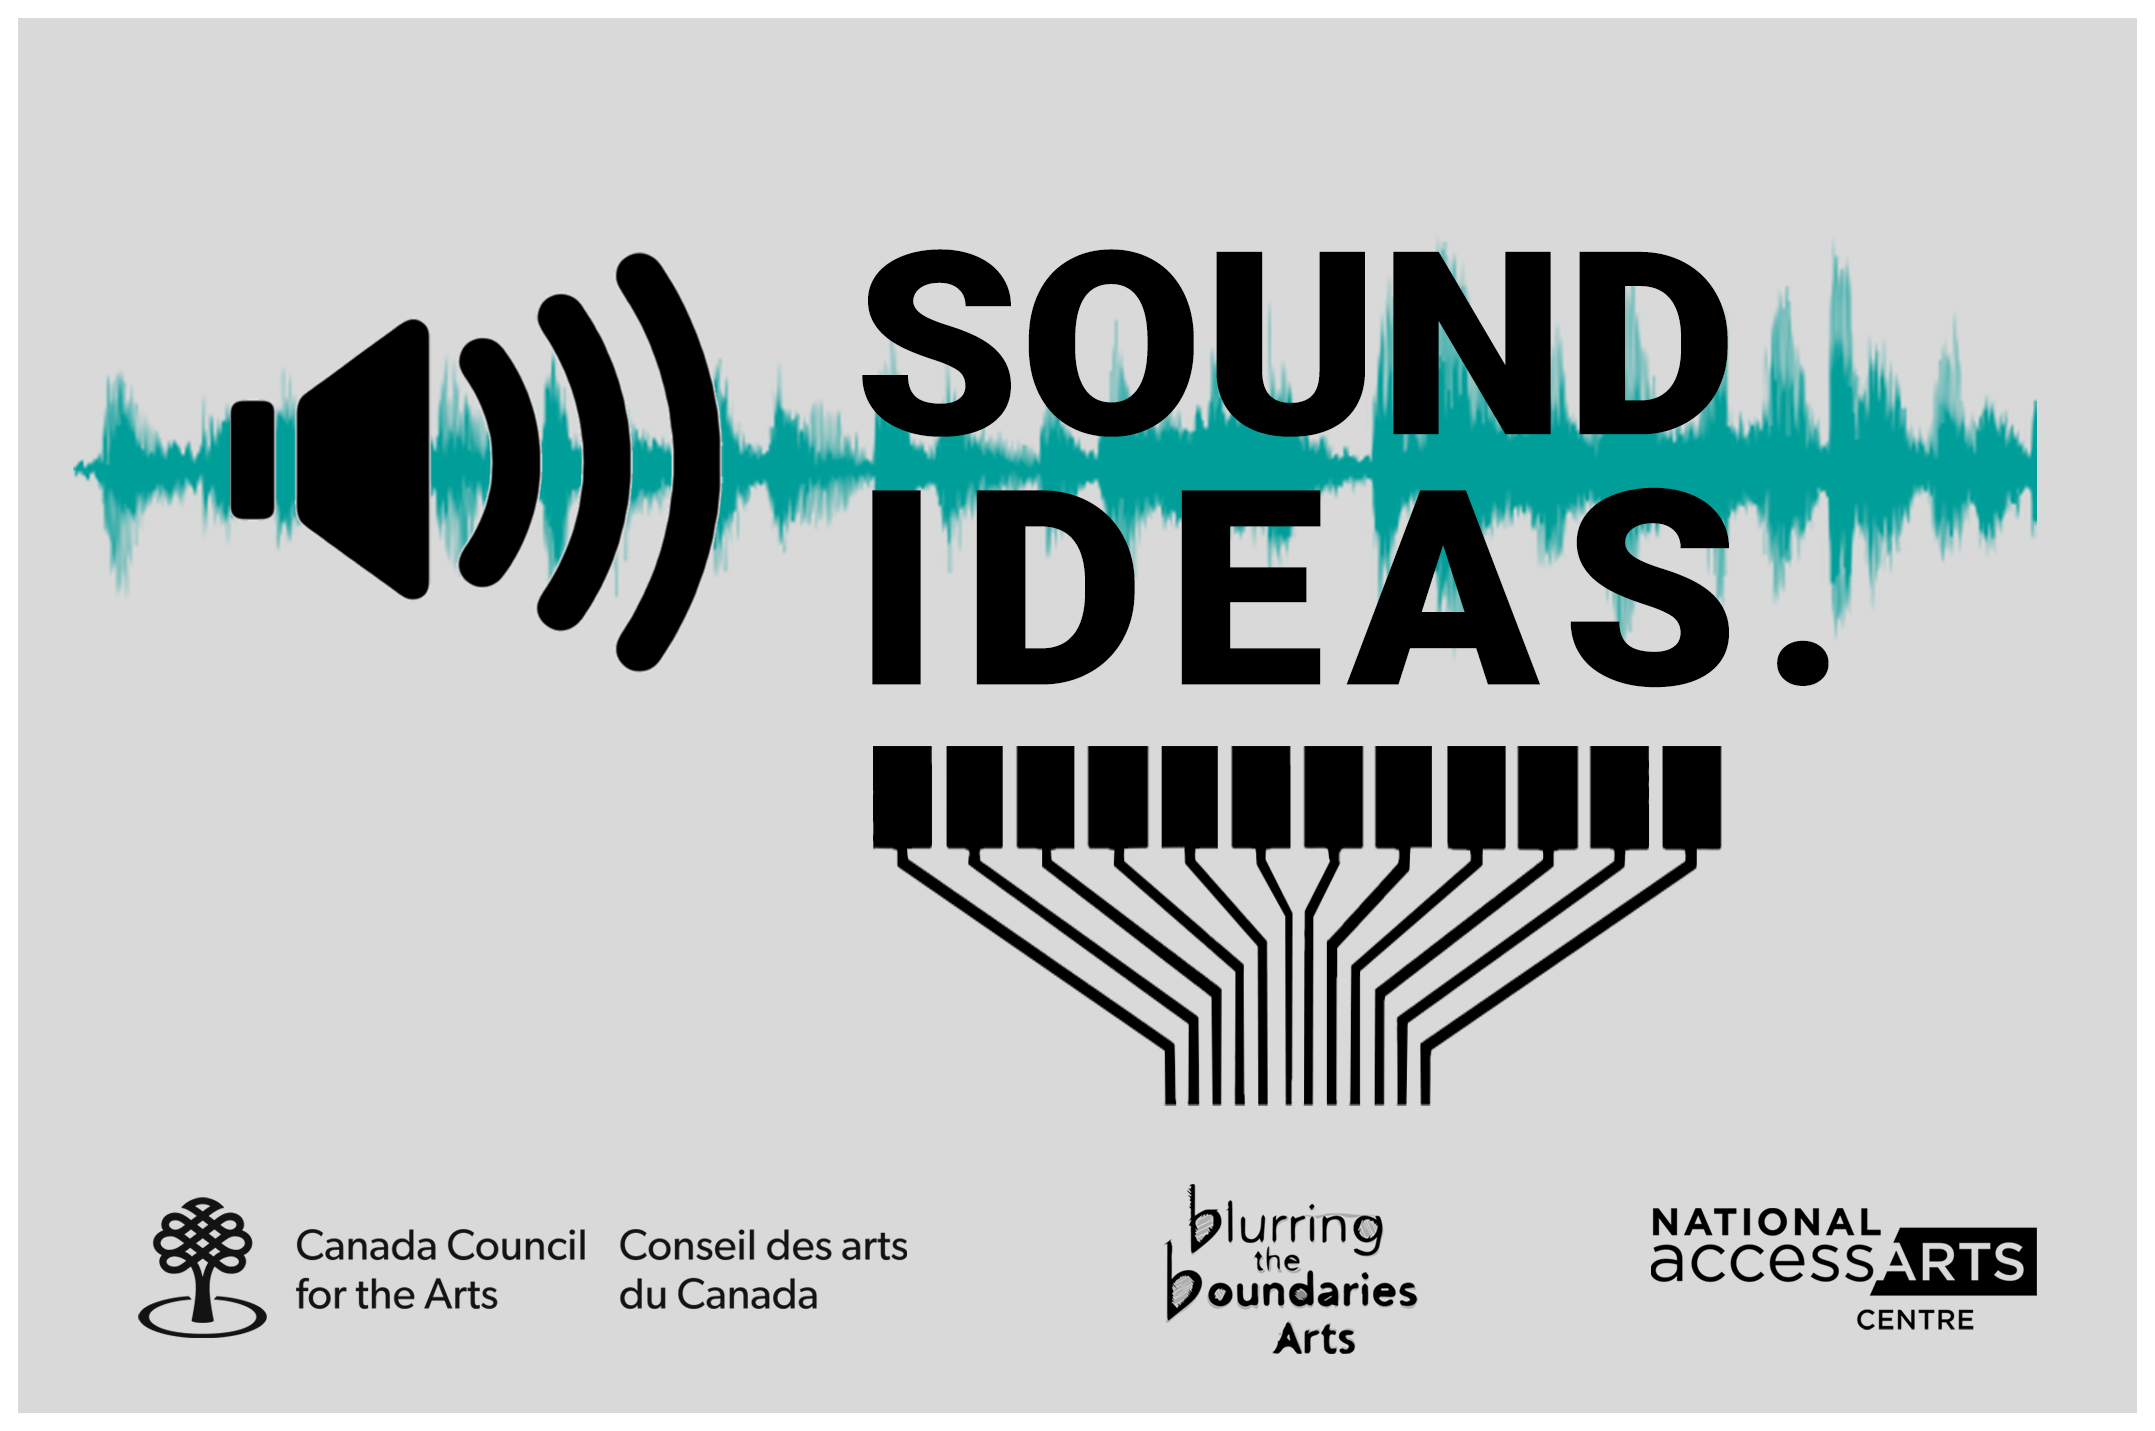 A black speaker illustration, green sound wave, and custom instrument illustration. Workshop title, “Sound ideas,”is overlaid on top of the soundwave on a gray background. Logos for Blurring the boundaries, the NaAC, and Canada Council for the Arts are displayed on the bottom.